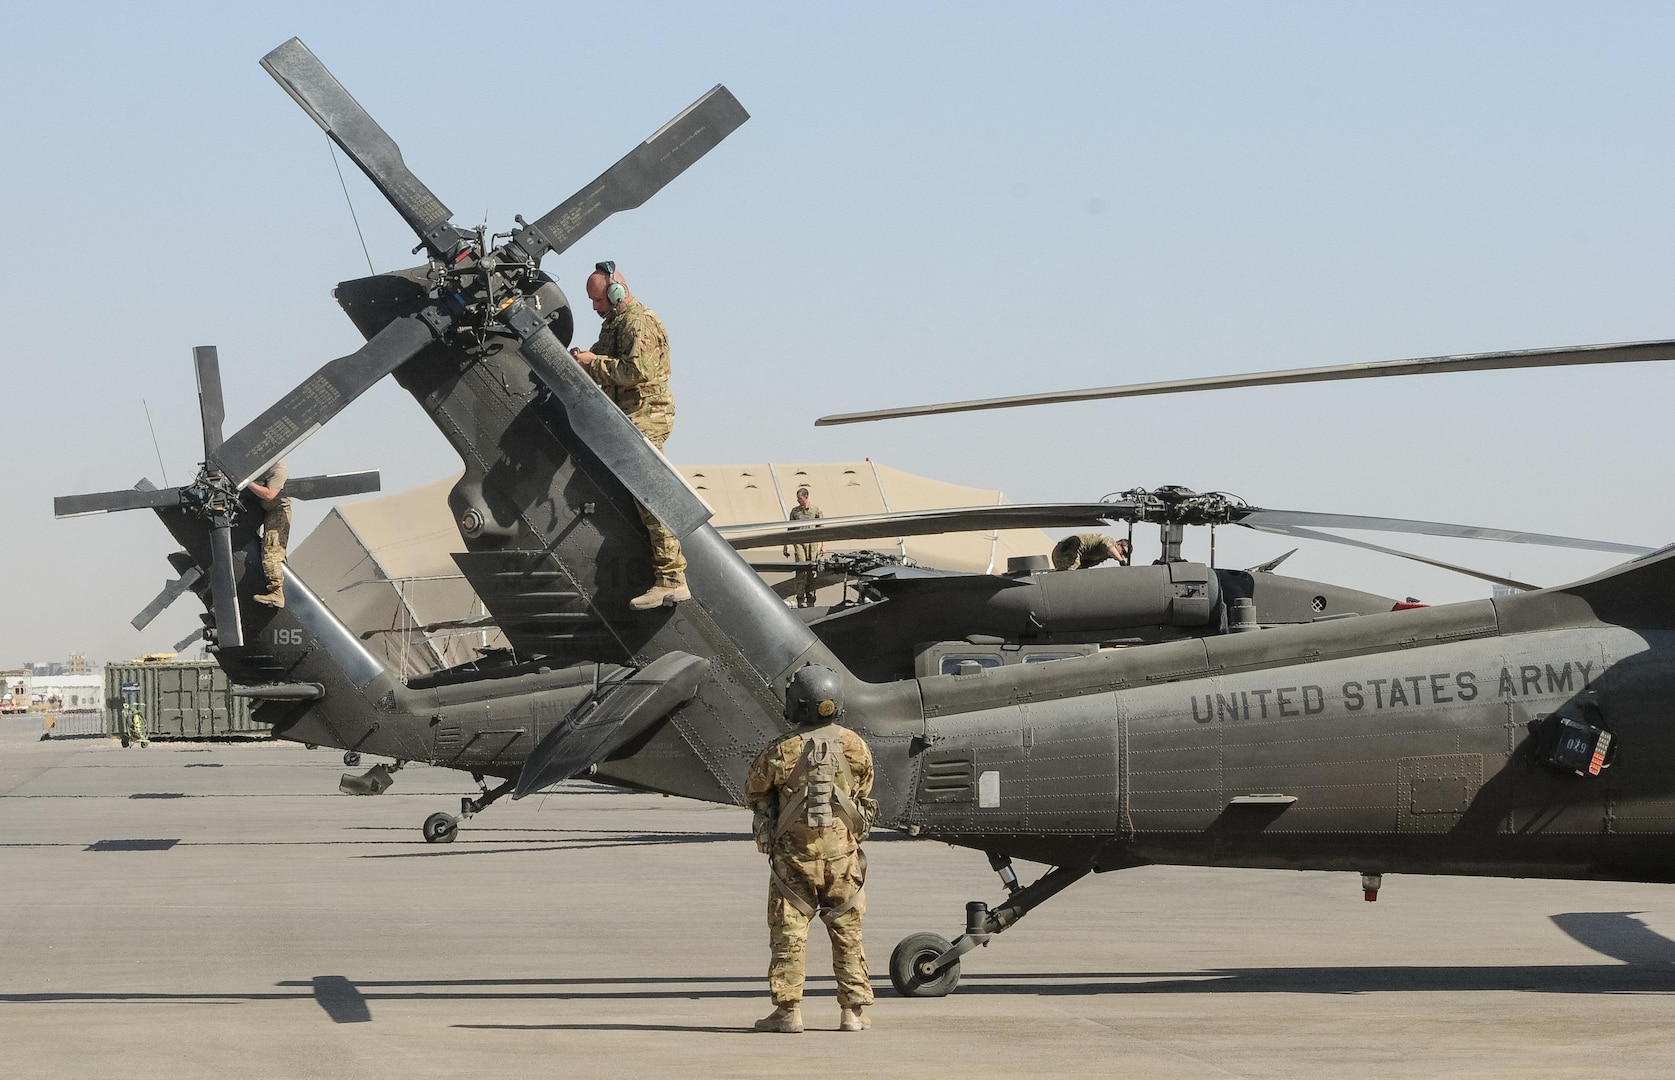 ERBIL, Iraq – Crew chiefs assigned to B Company,2-149th General Support Aviation Battalion, Task Force Saber, conduct post-flight inspections on UH-60M Black Hawk helicopters at Erbil, Iraq, July 11,2017. The UH-60M Black Hawk provides Task Force Saber the capability to conduct distinguished visitor movement, logistical movement and aeromedical evacuation throughout the area of operations for Task Force Saber and Combined Joint Task Force – Operation Inherent Resolve. CJTF-OIR is the Coalition to defeat ISIS in Iraq and Syria. (U.S. Army photo by Capt. Stephen James)